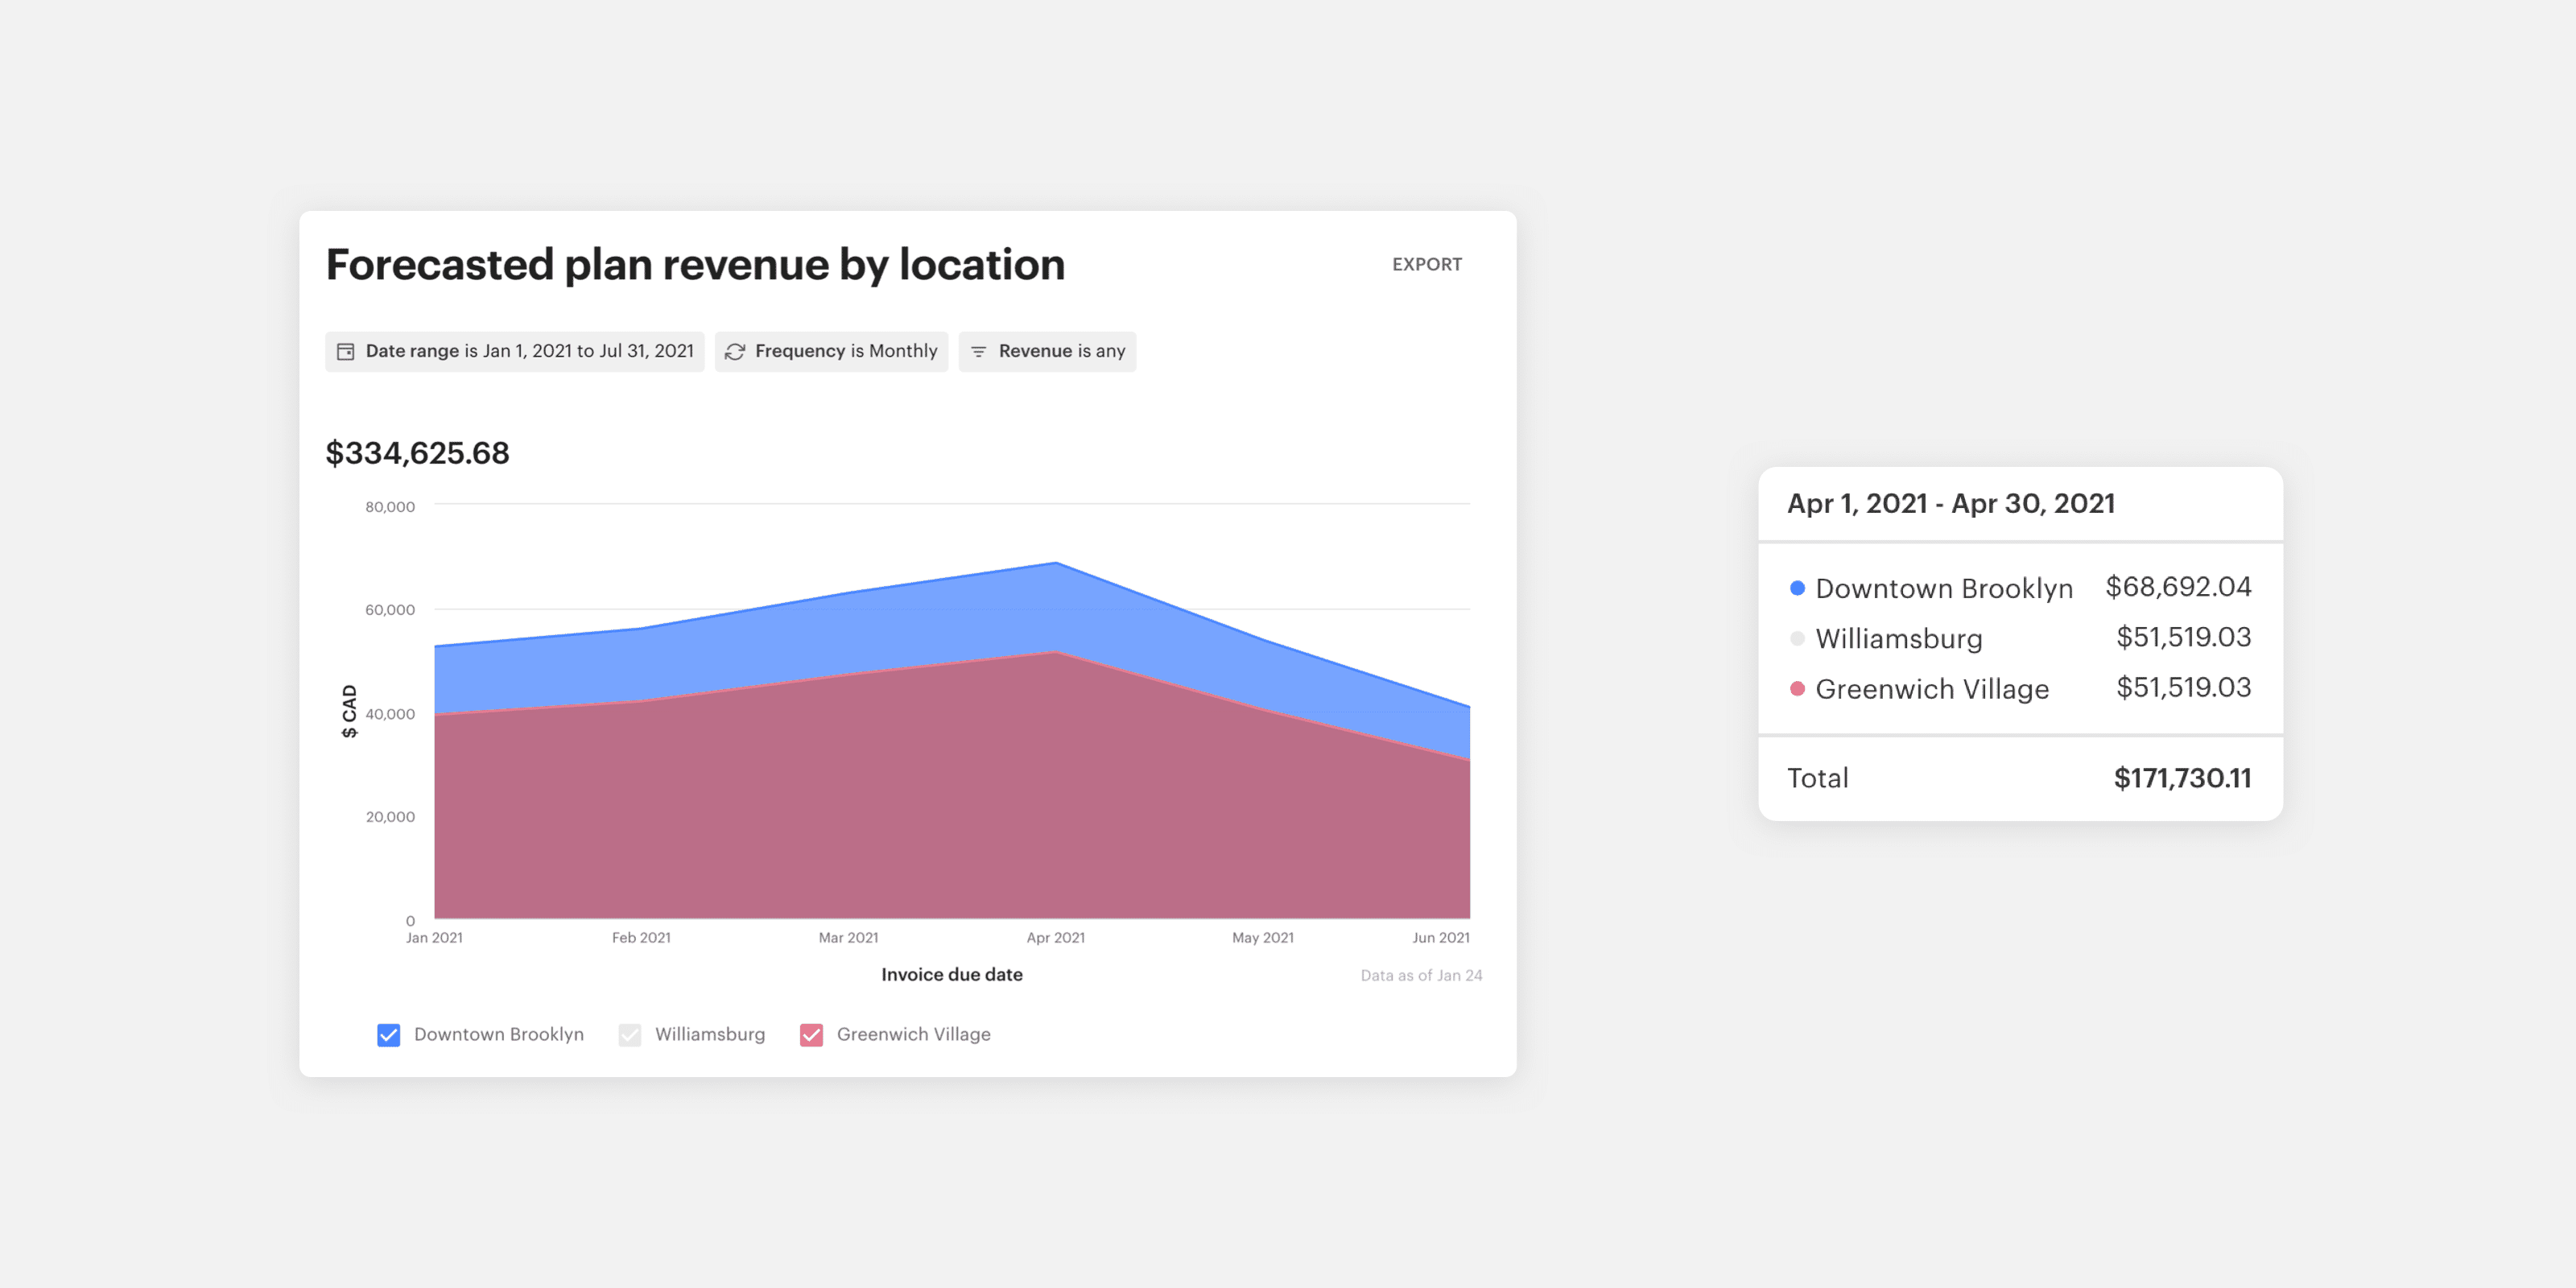 New analytics report on forecasted plan revenue